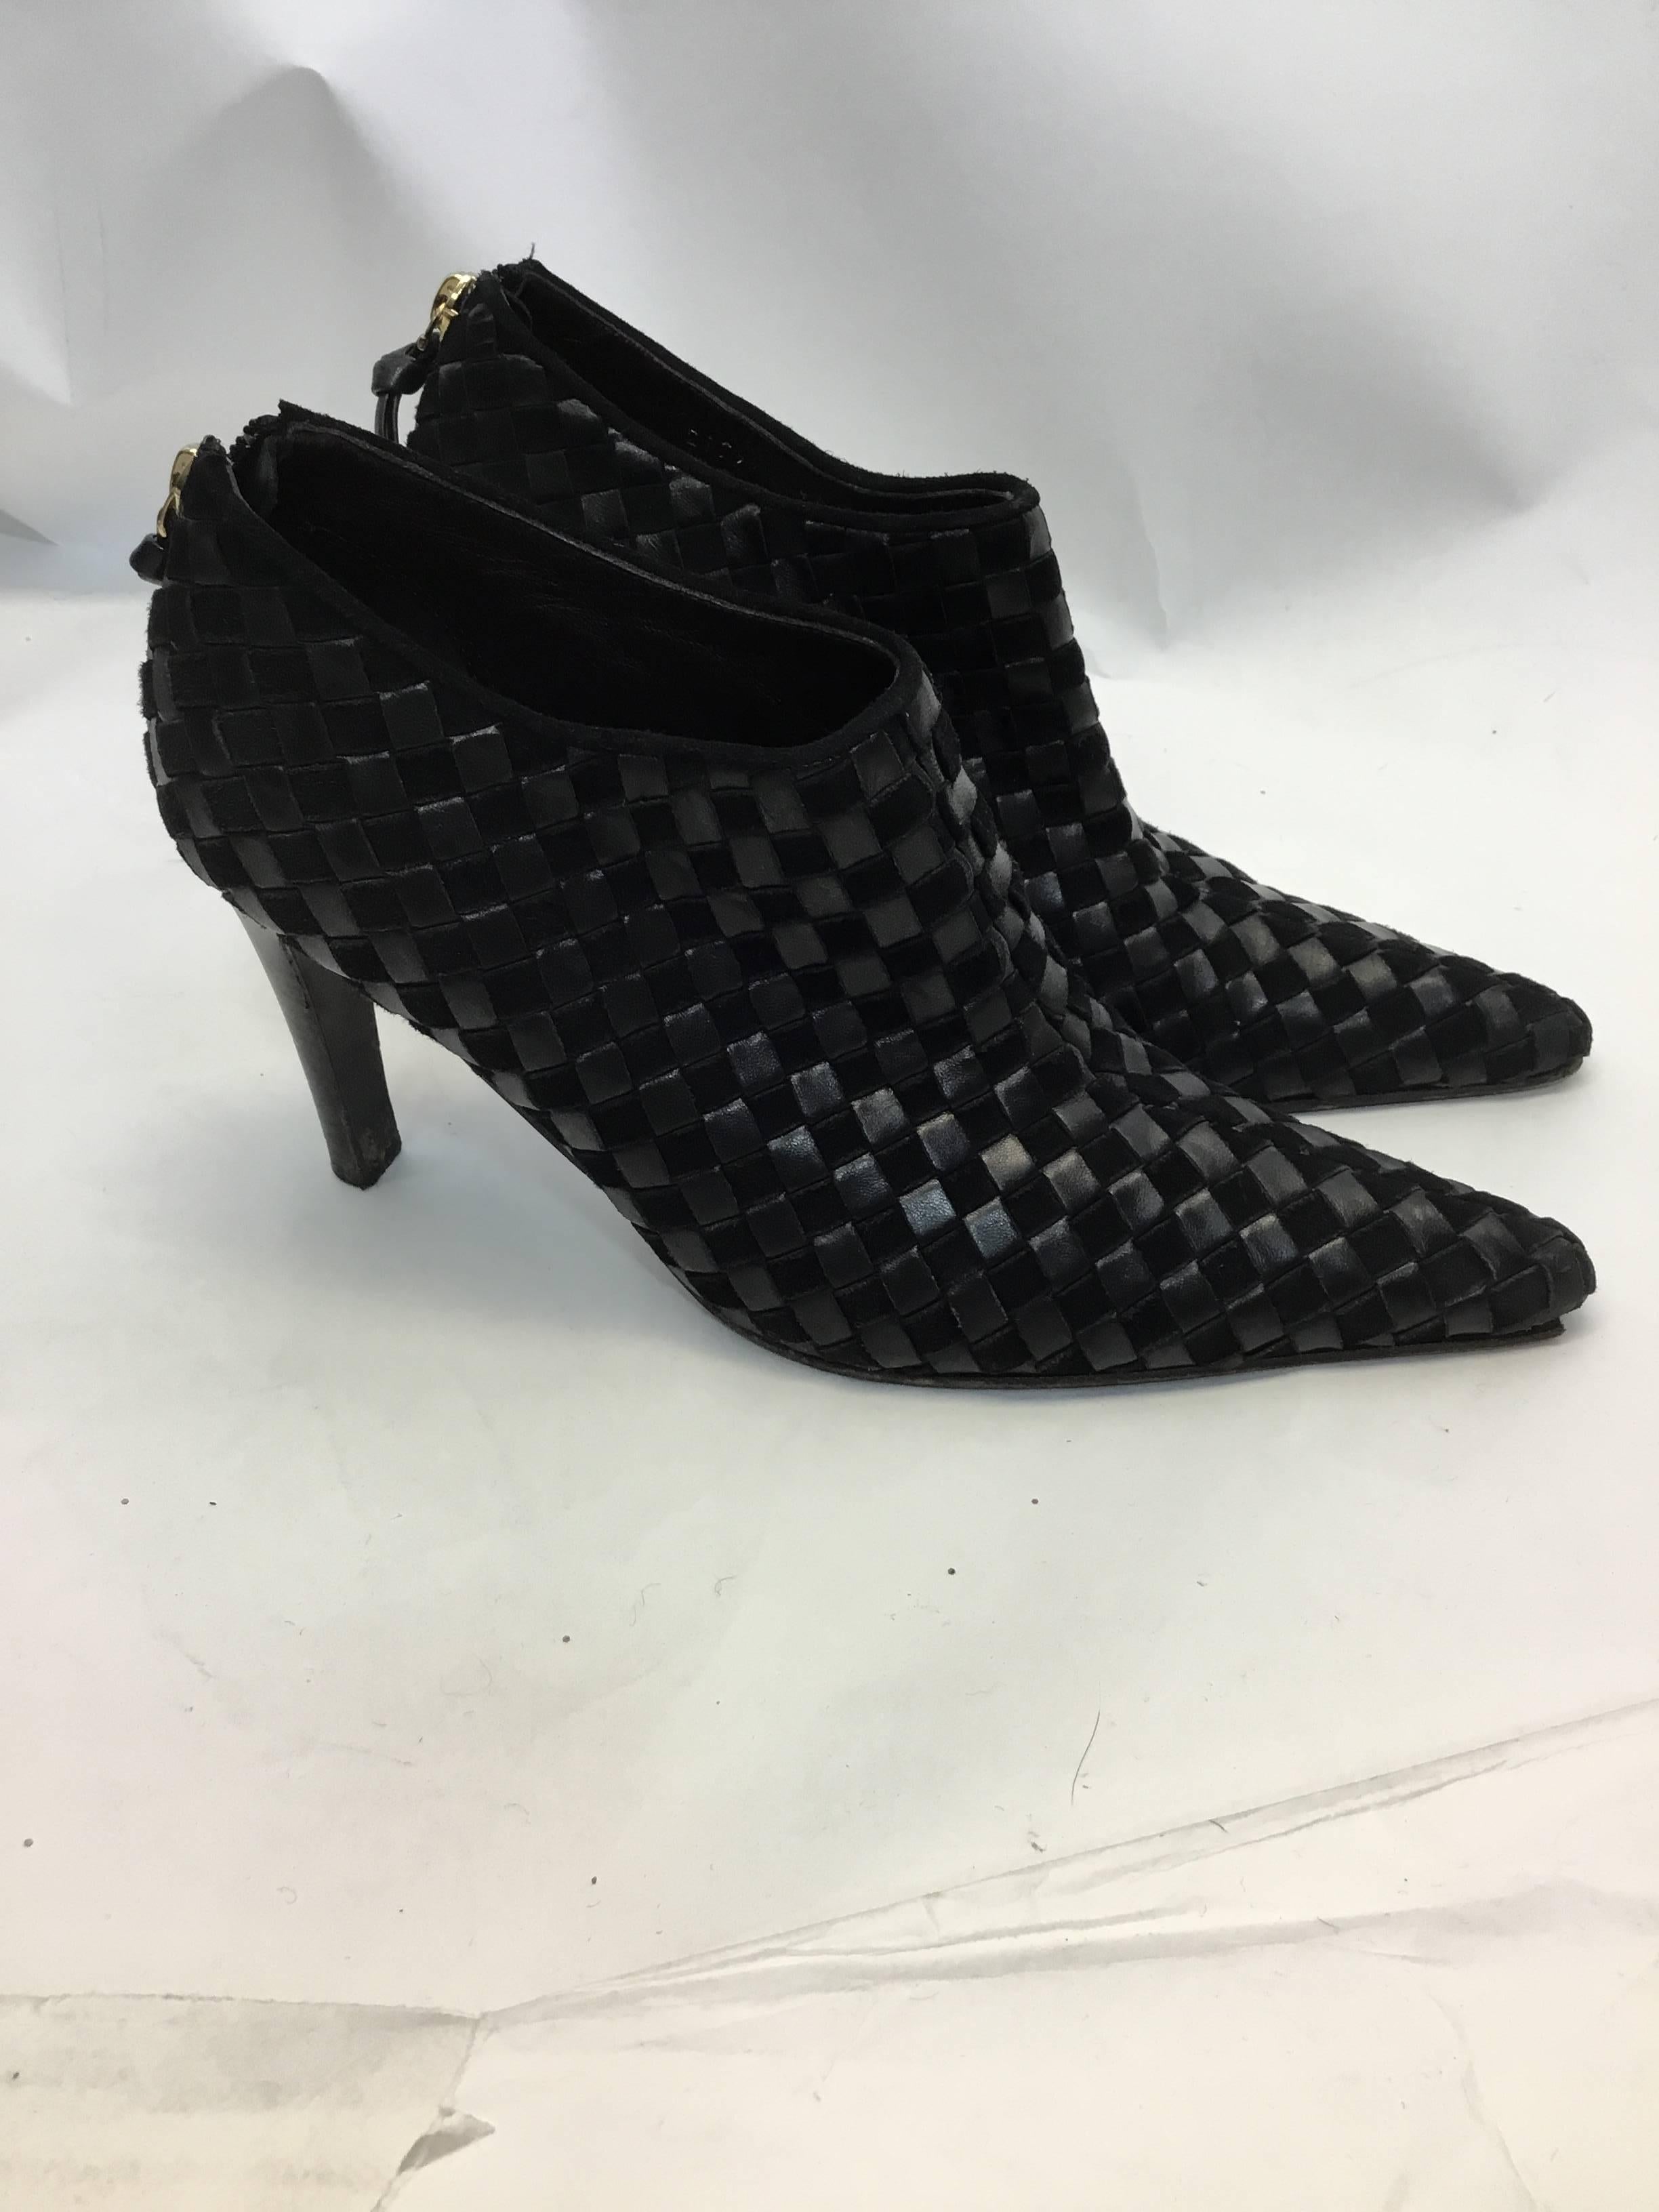 Bottega Veneta Black Leather Ankle Booties In Excellent Condition For Sale In Narberth, PA